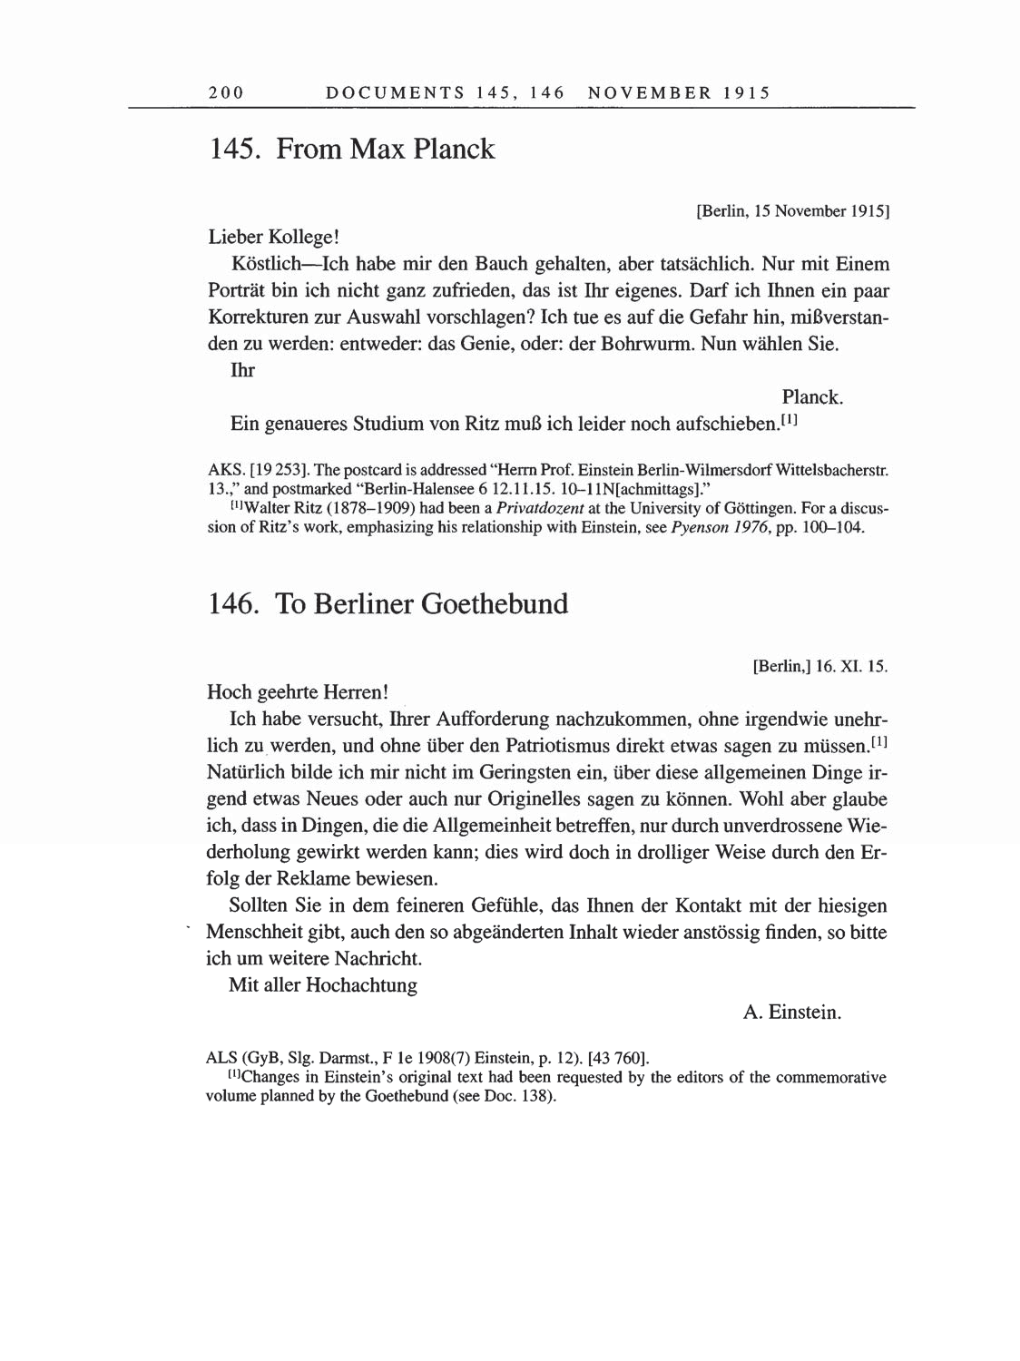 Volume 8, Part A: The Berlin Years: Correspondence 1914-1917 page 200